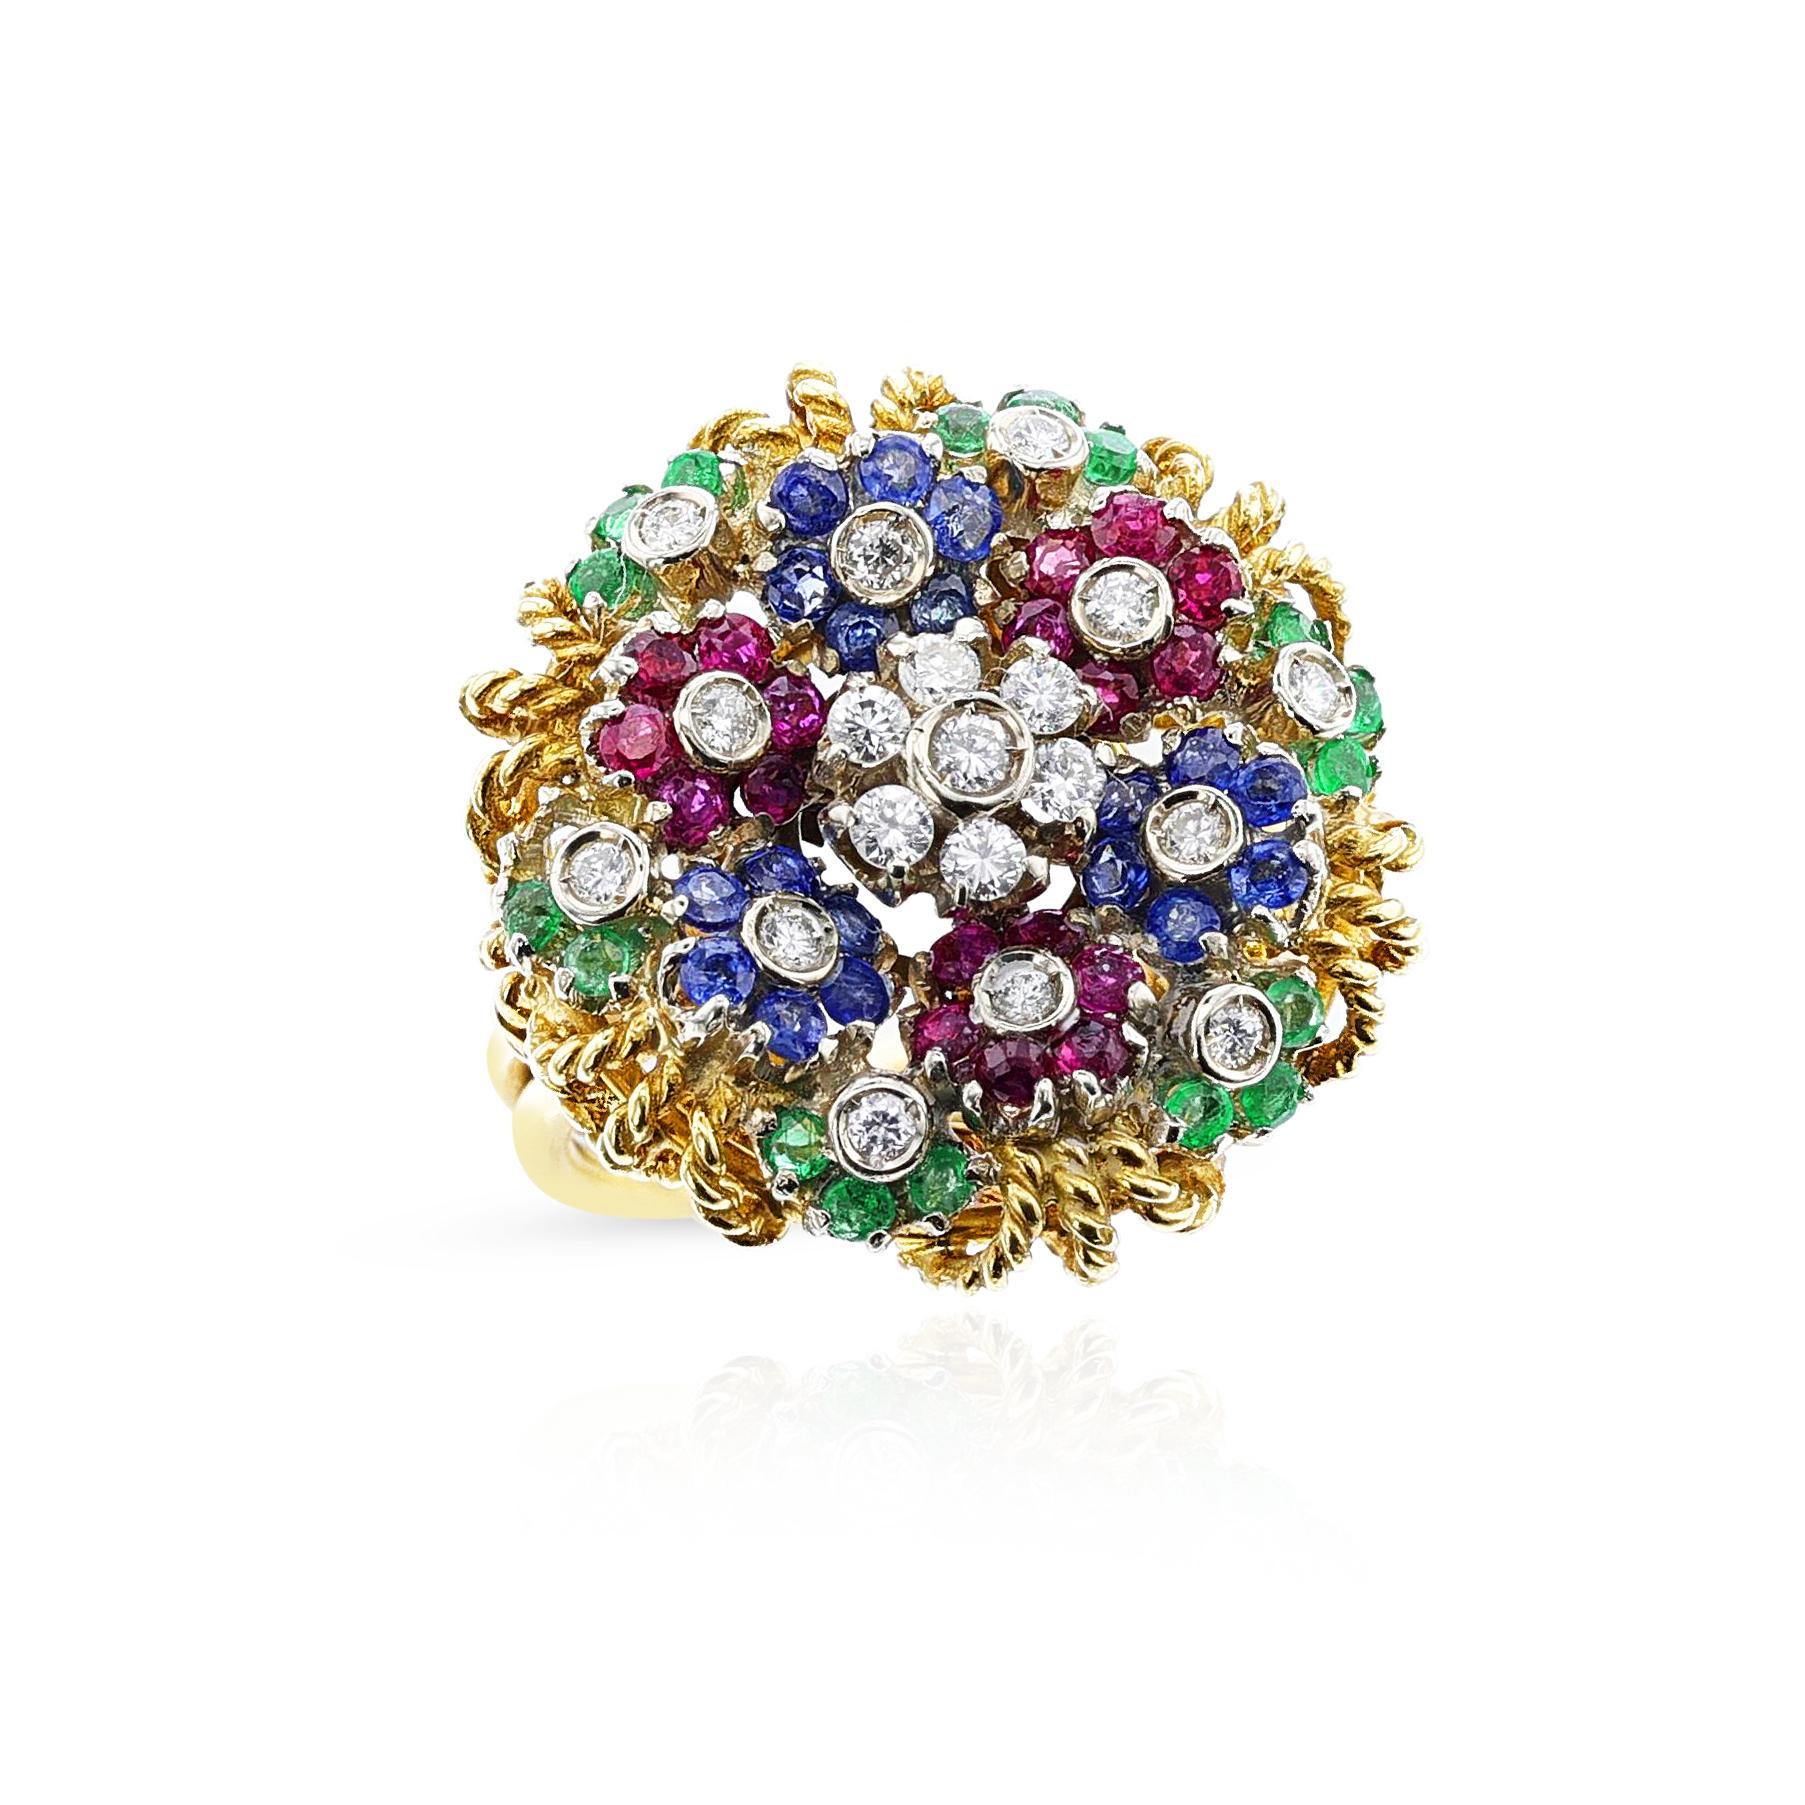 Ruby, Emerald, Sapphire and Diamond Floral Ring, 18k For Sale 1